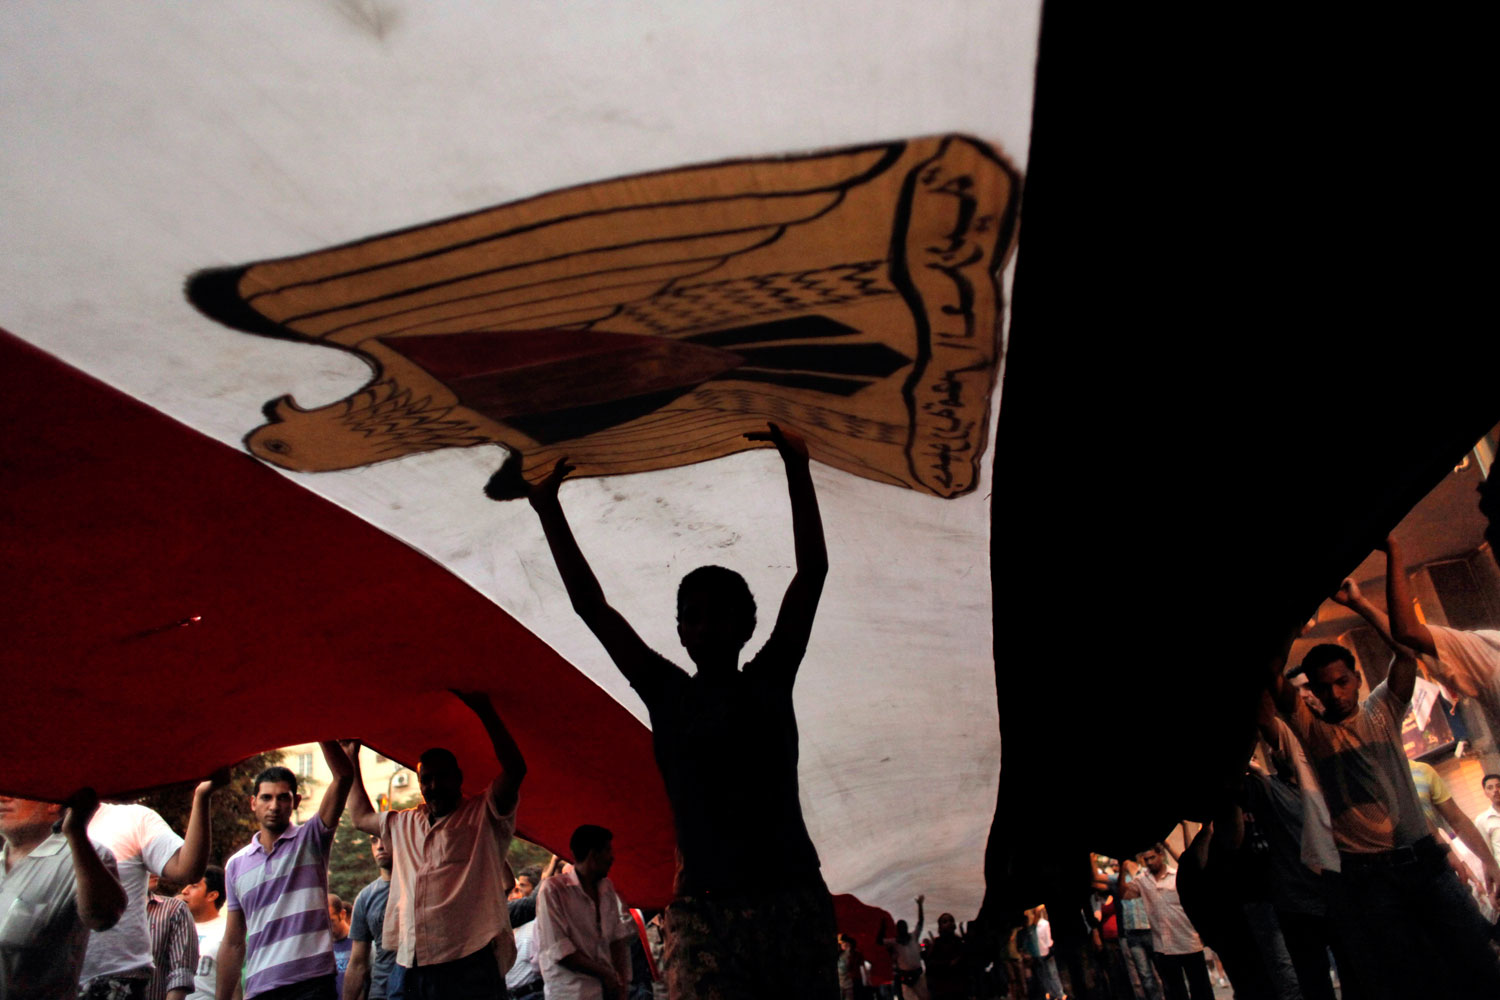 July 12, 2011. Protesters march with a giant Egyptian flag in Cairo’s Tahrir Square. Egypt’s military rulers have warned protesters against “harming public interests” as demonstrators laid siege to Cairo’s largest government building and threatened to expand their sit-in to other sites in the capital.